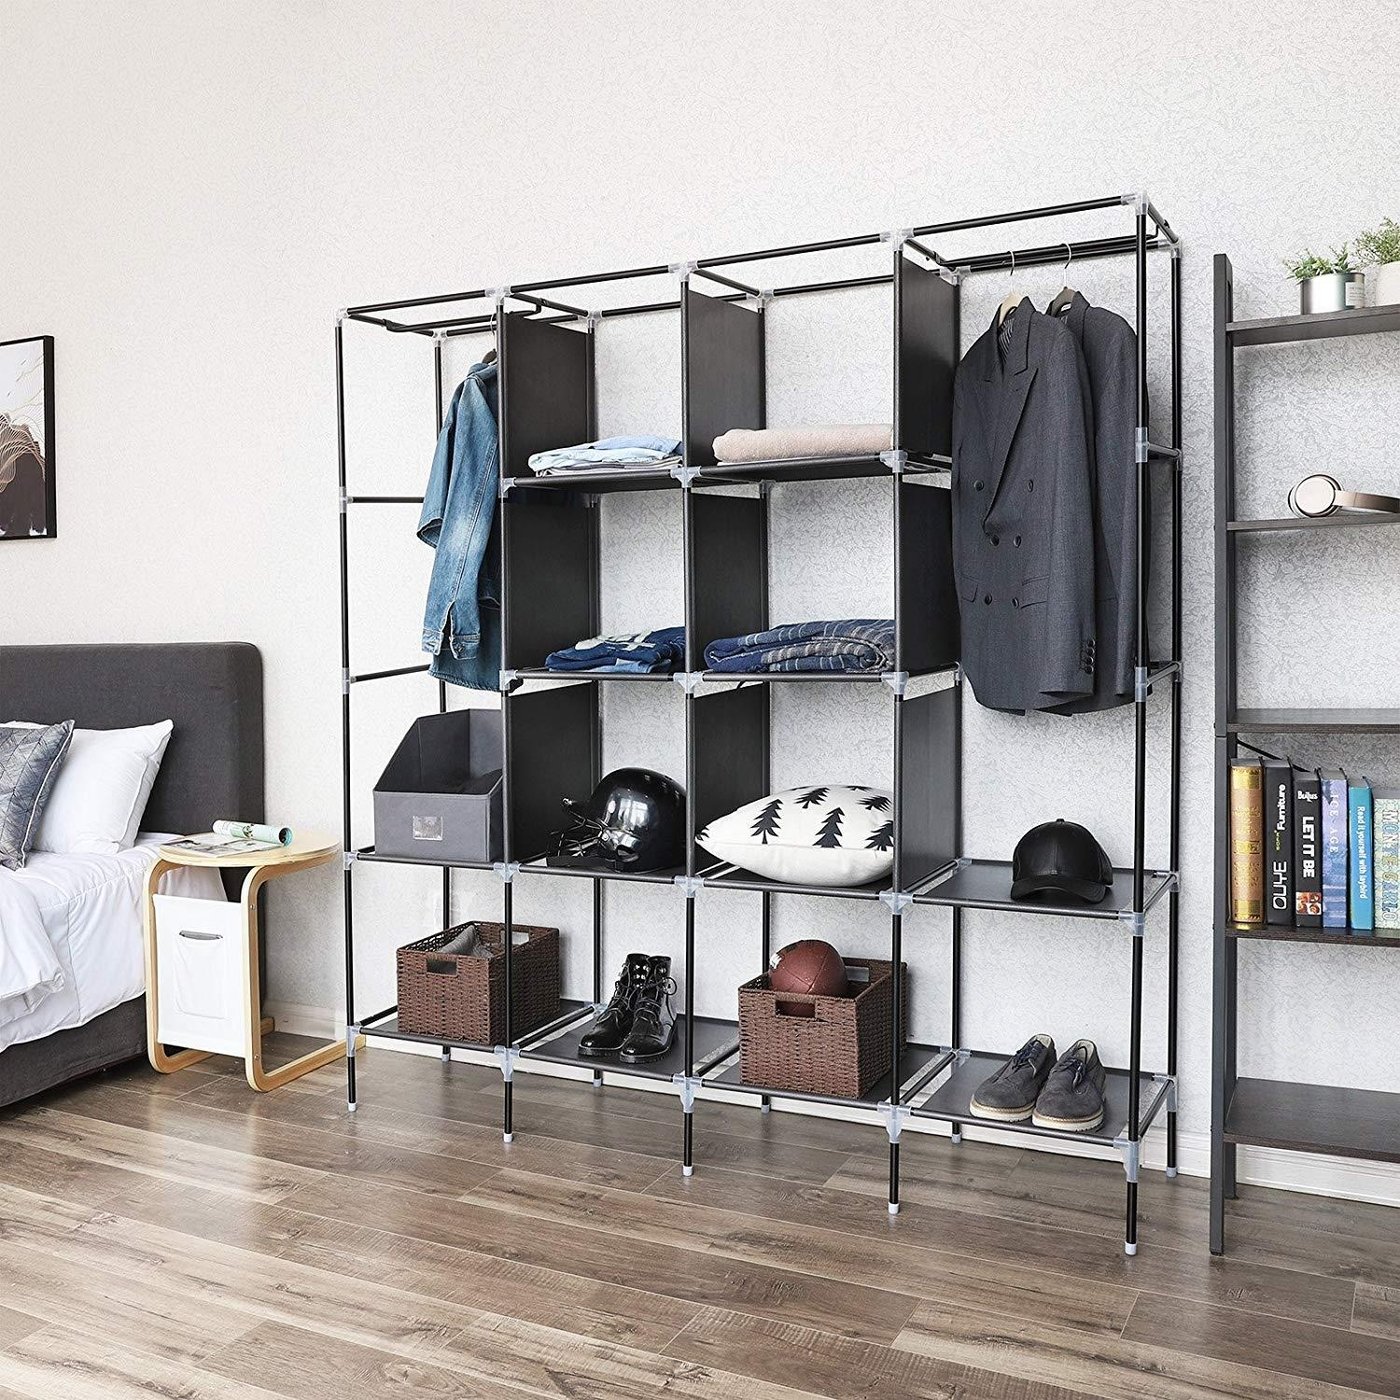 How to Choose a Clothes Rack and Garment Rack - Foter